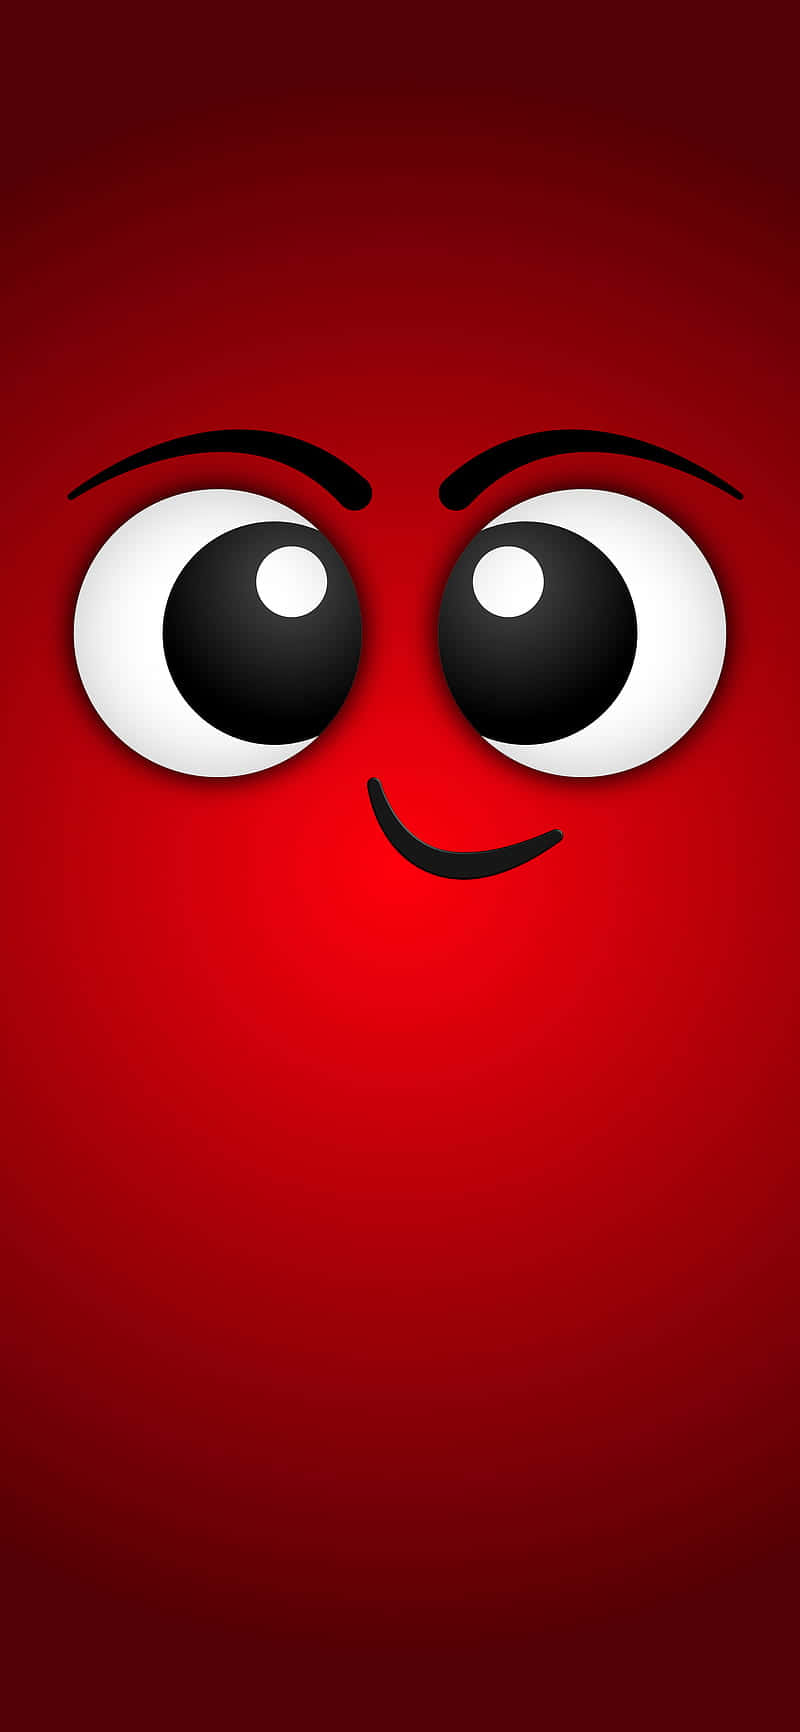 Download A Red Face With Black Eyes Wallpaper | Wallpapers.com